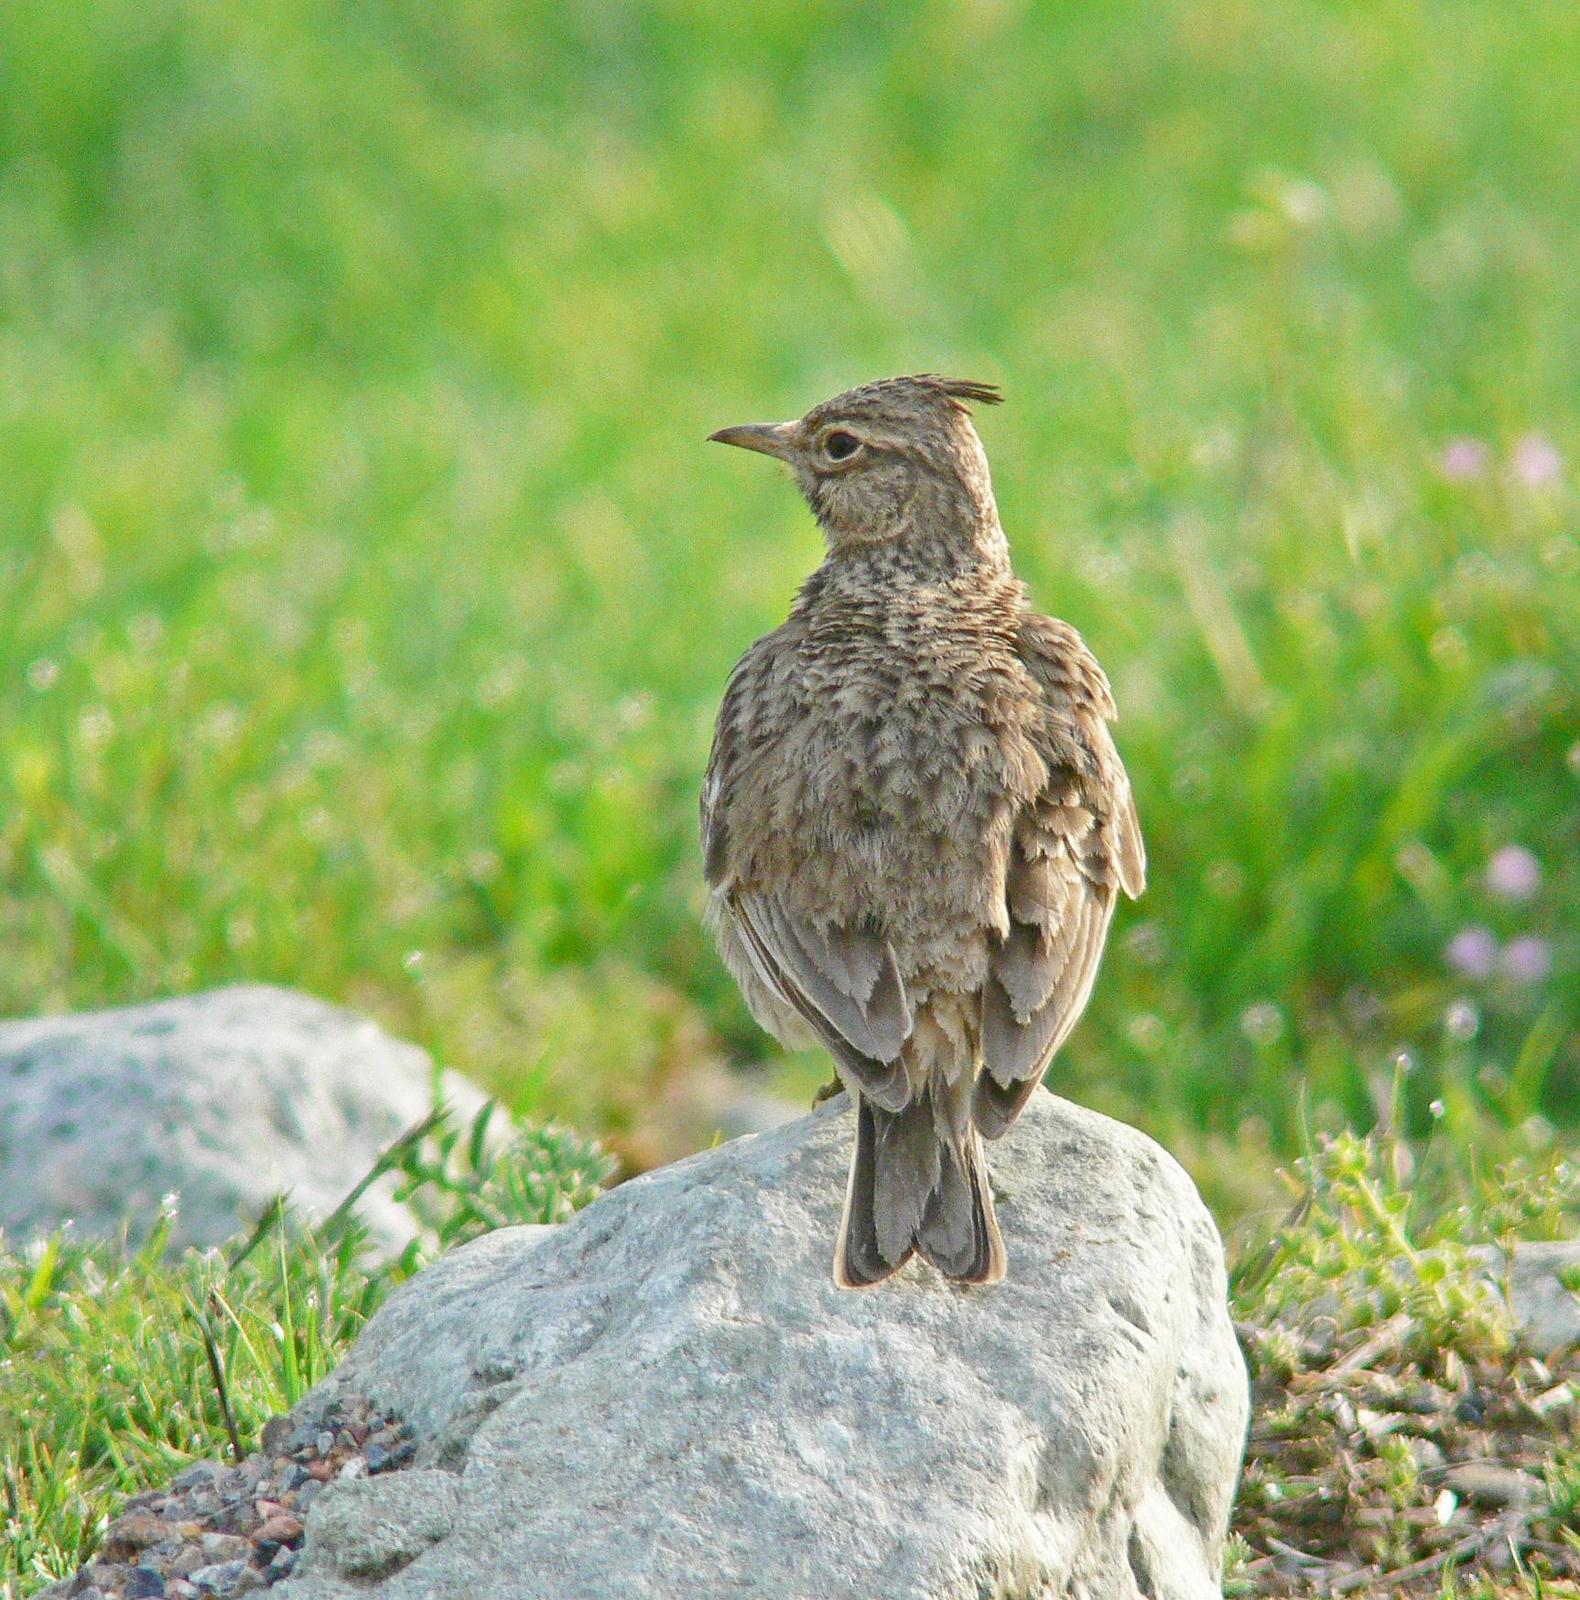 Crested/Maghreb Lark Photo by Steven Mlodinow